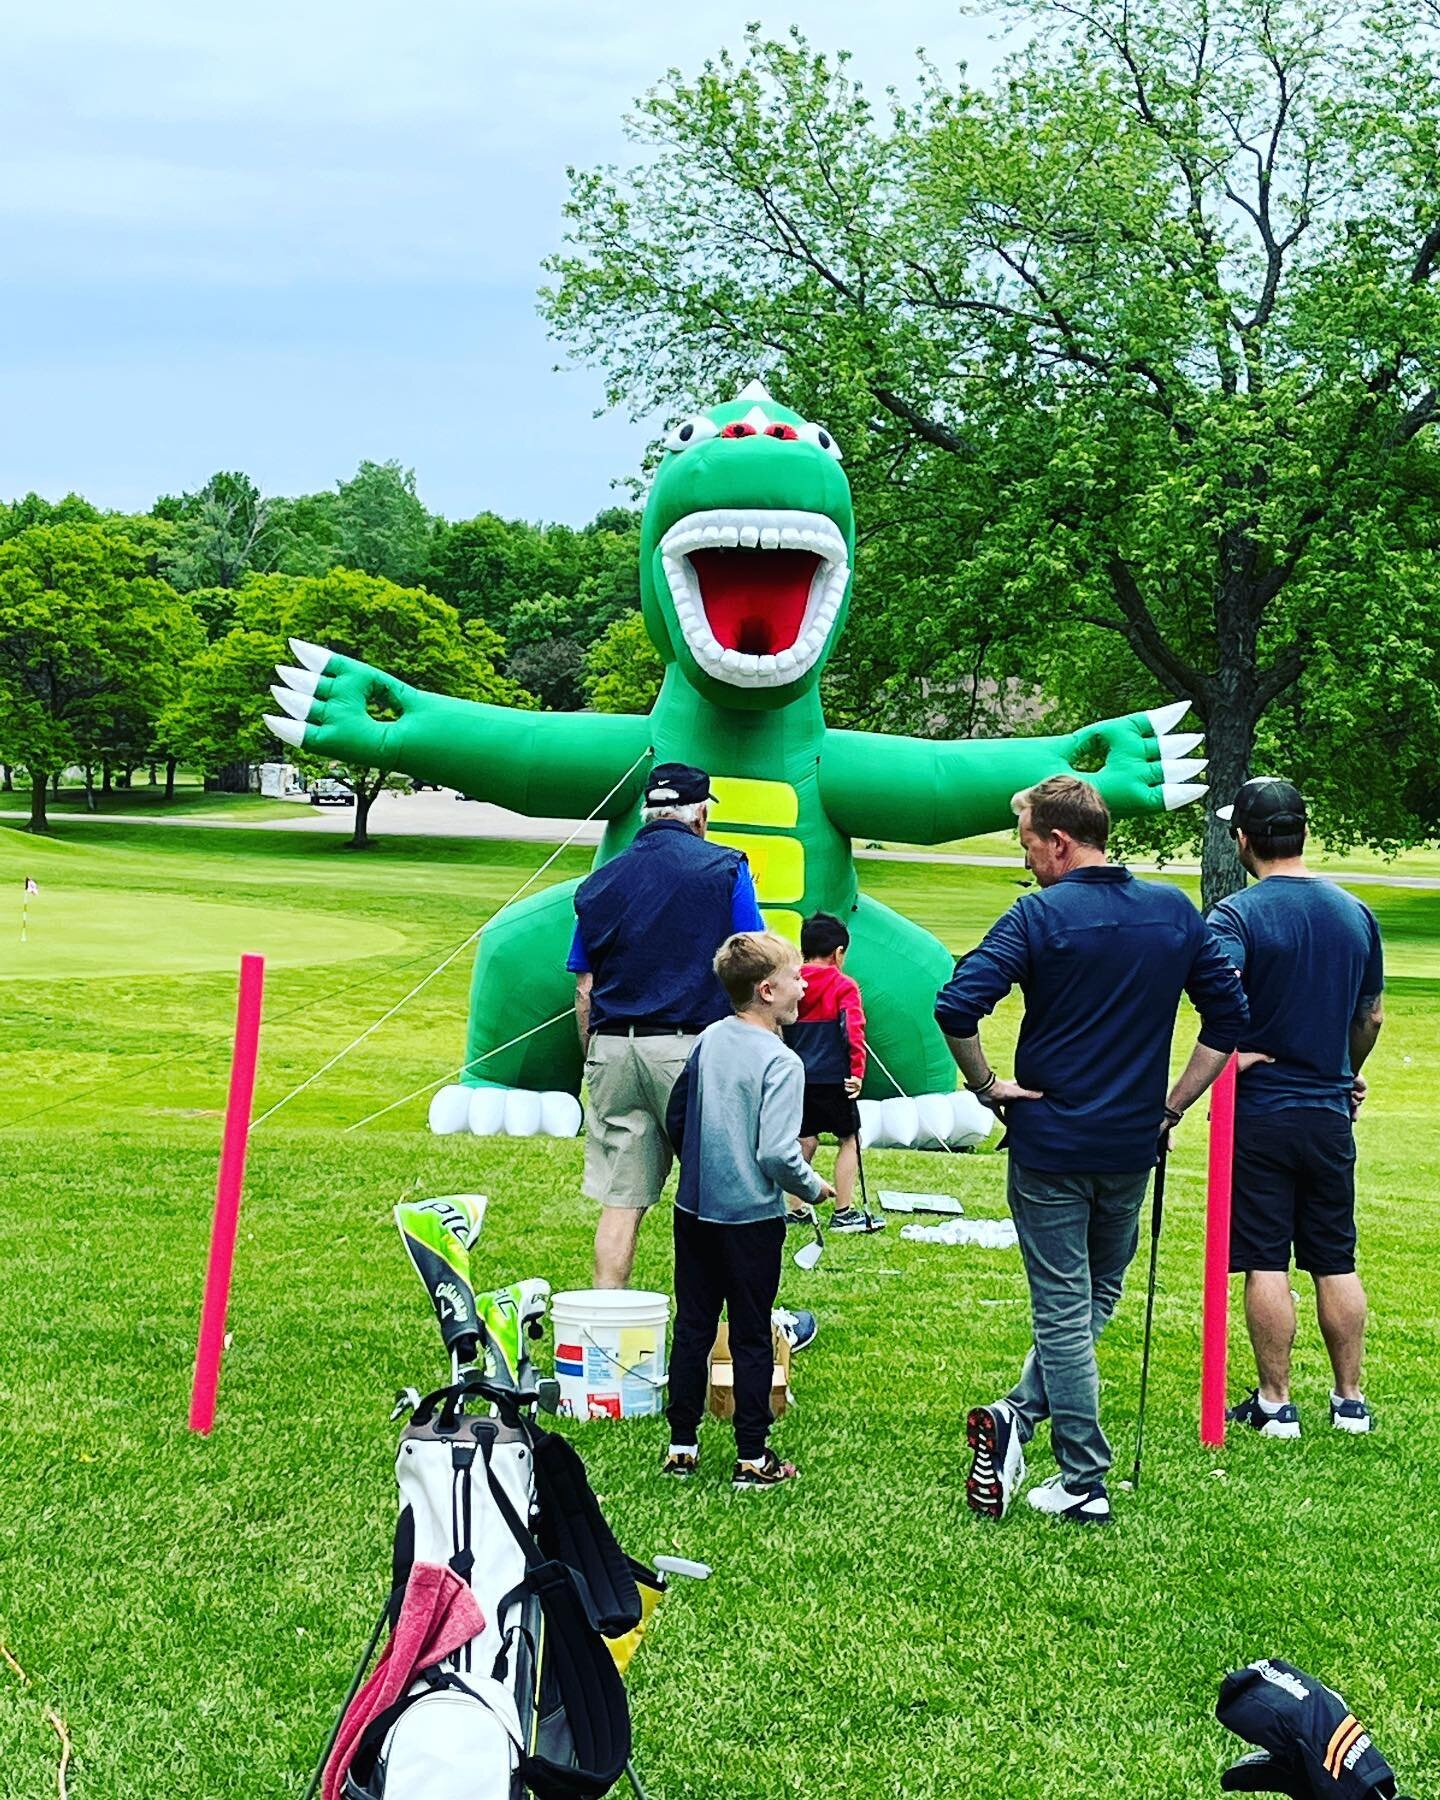 A very fun community event at Hyland Greens Golf Course today hosted by Three Rivers Parks! 🙌